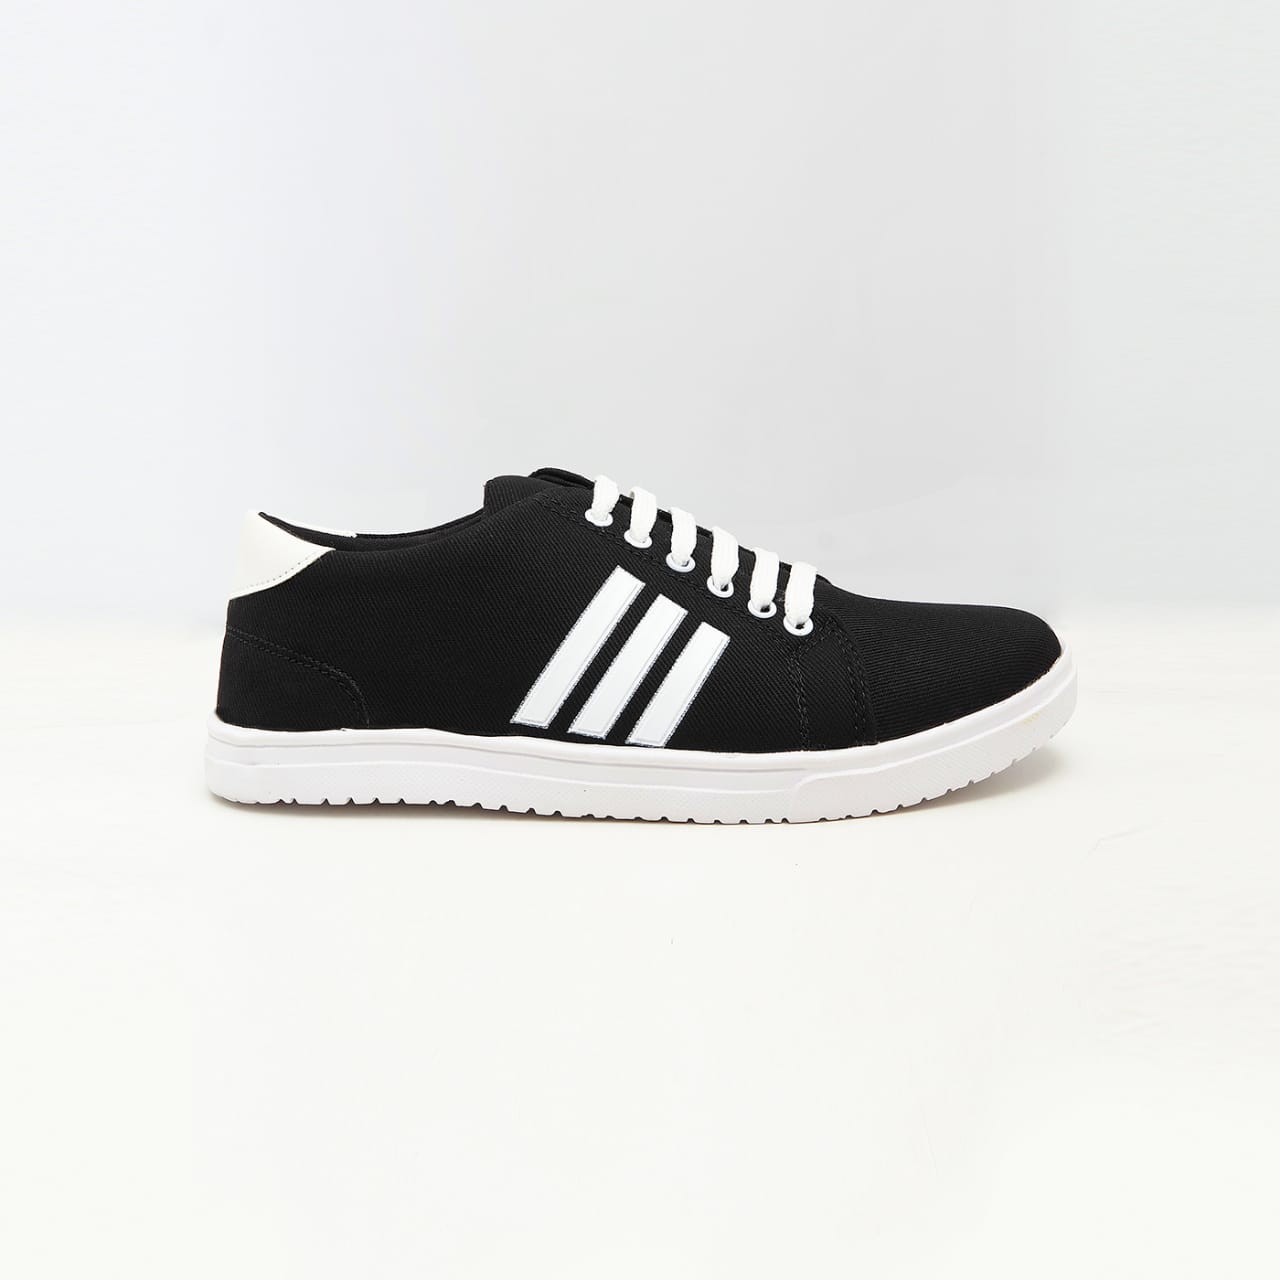 Mens Black Sneakers Shoes with White Lines 002